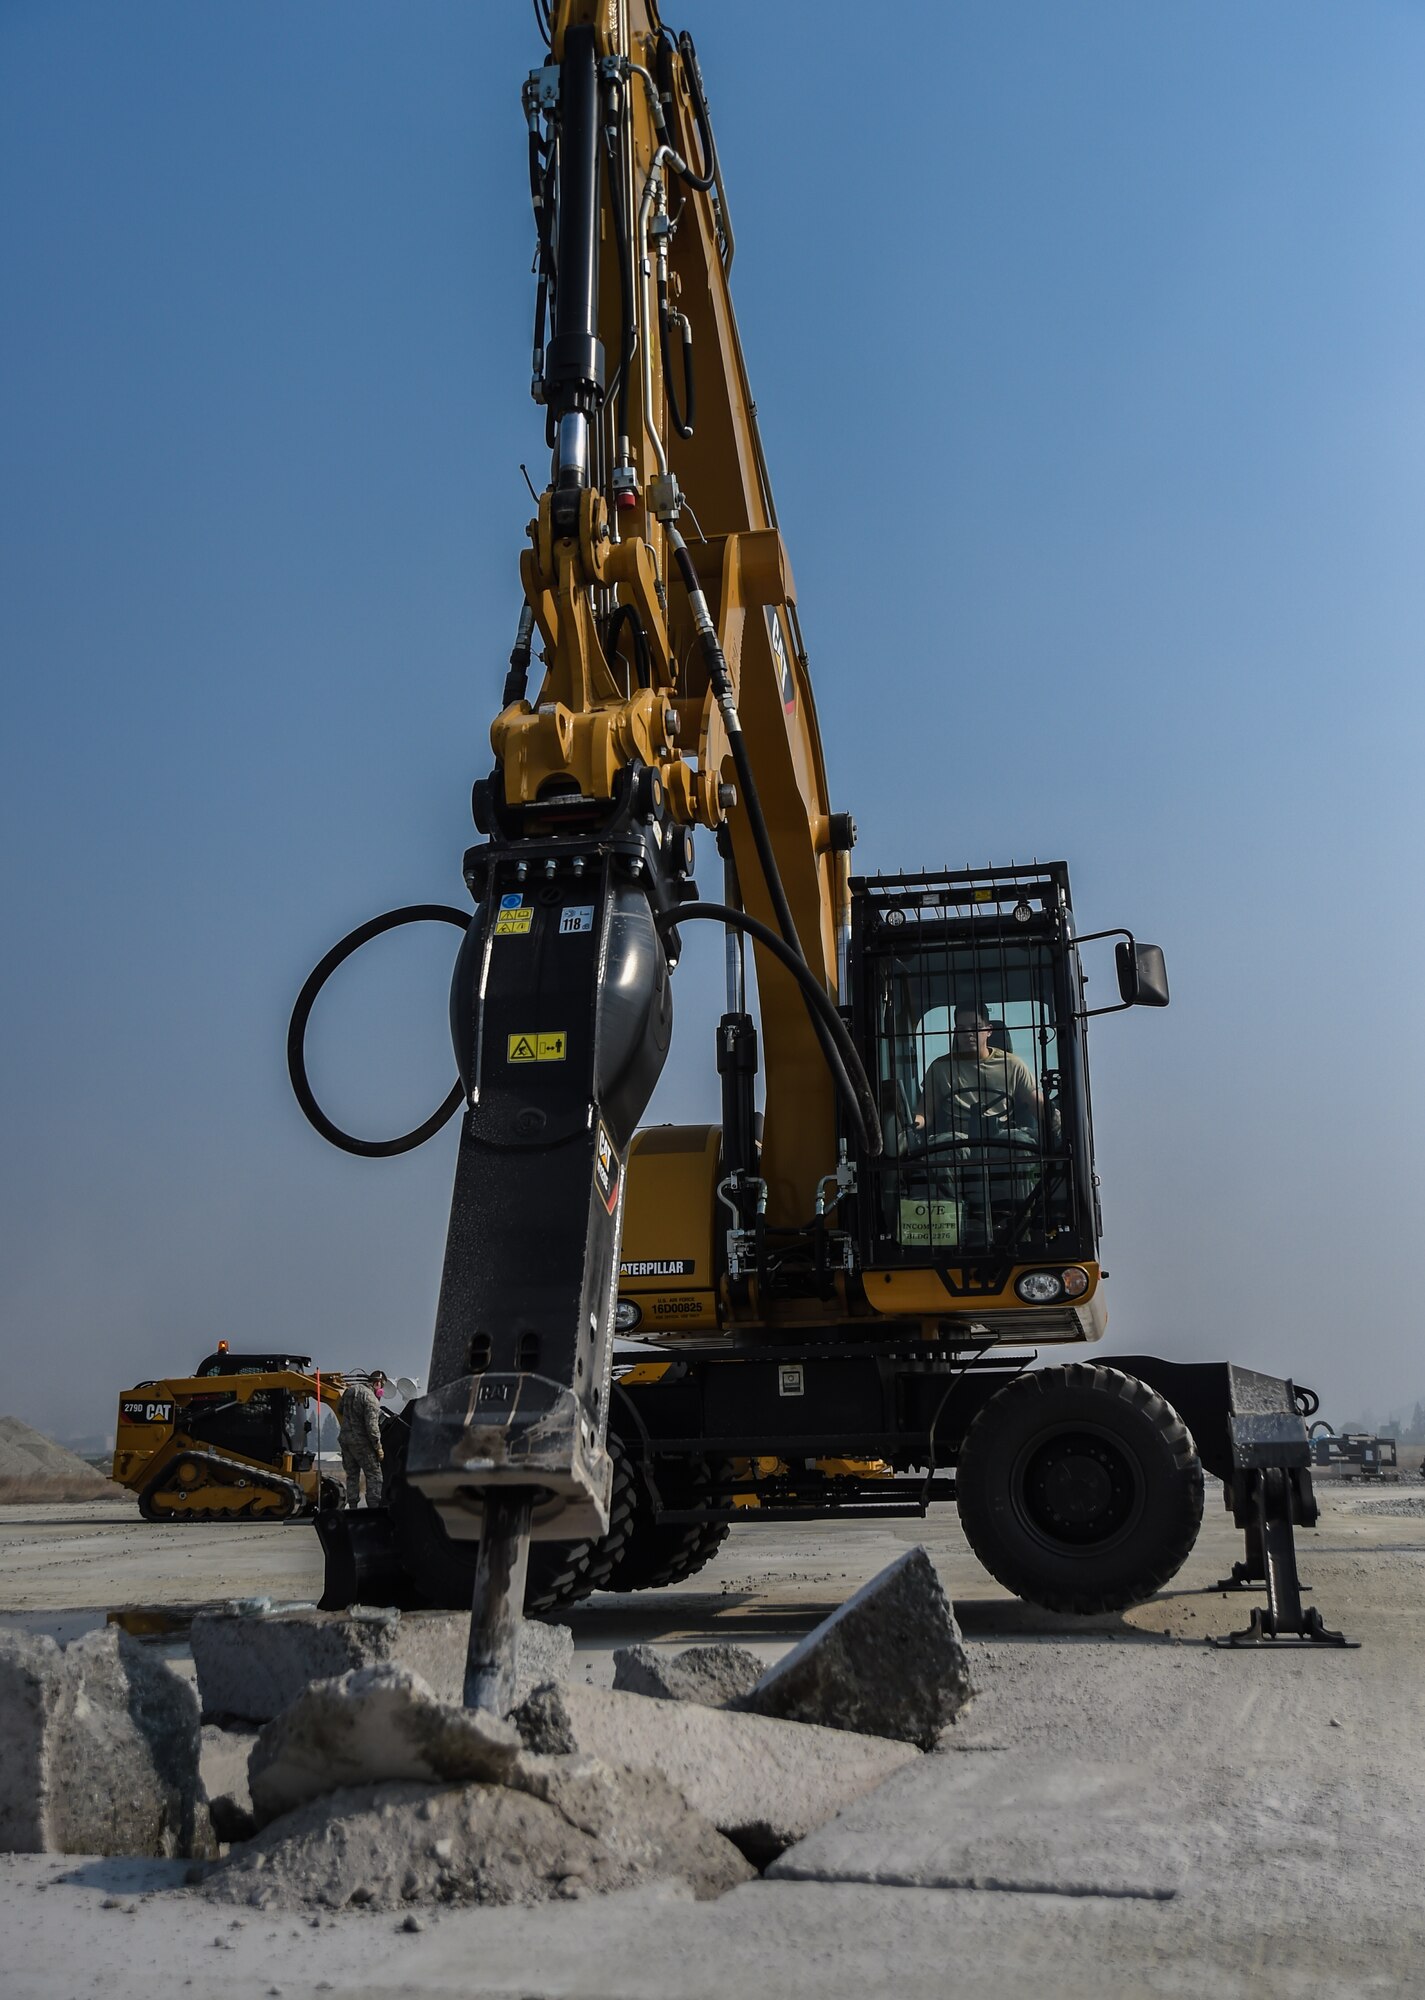 U.S. Air Force Senior Airman Cameron Pinkerton, 773d Civil Engineer Squadron, excavates a crater during a Rapid Airfield Damage Repair training exercise at Gwangju Air Base, Republic of Korea., Nov. 8, 2017. Similar to an assembly line, RADR systematically lines up civil engineer personnel and equipment to quickly repair a runway after attack. The new process makes use of rapid-setting concrete which enables vehicles to pass over it after one hour, and after two hours of cure time, it can support any aircraft. (U.S. Air Force photo by Senior Airman Curt Beach)